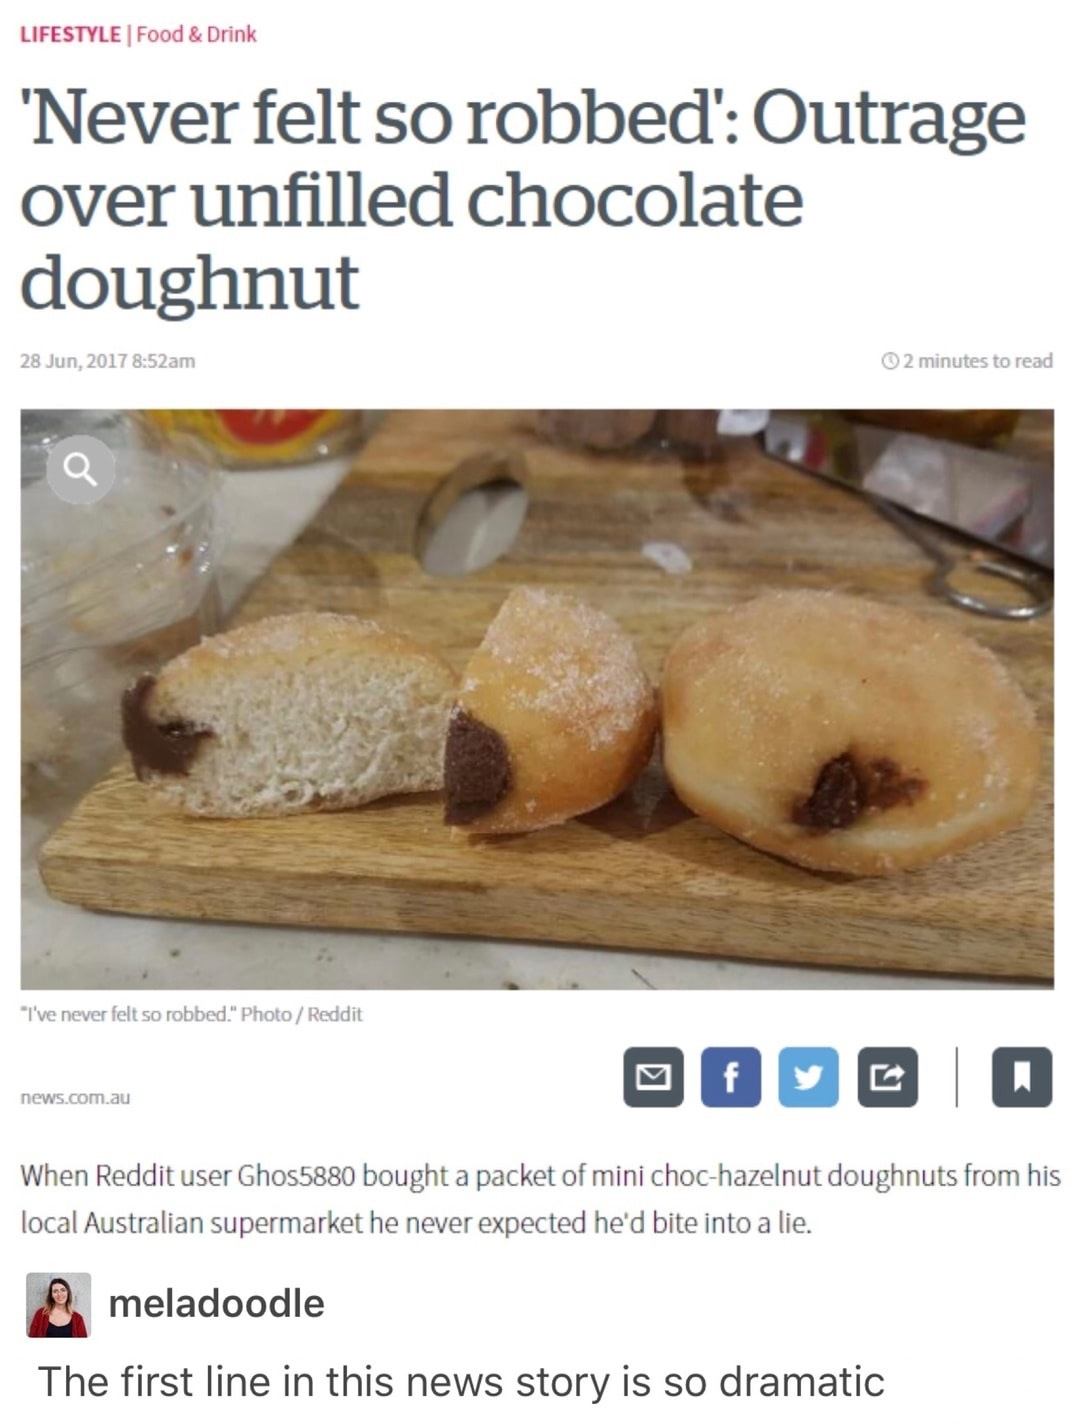 woolworths nutella donuts - Lifestyle Food & Drink 'Never felt so robbed' Outrage over unfilled chocolate doughnut am 2 minutes to read "I've never felt so robbed." Photo Reddit Oooo O news.com.au When Reddit user Ghos5880 bought a packet of mini chochaze